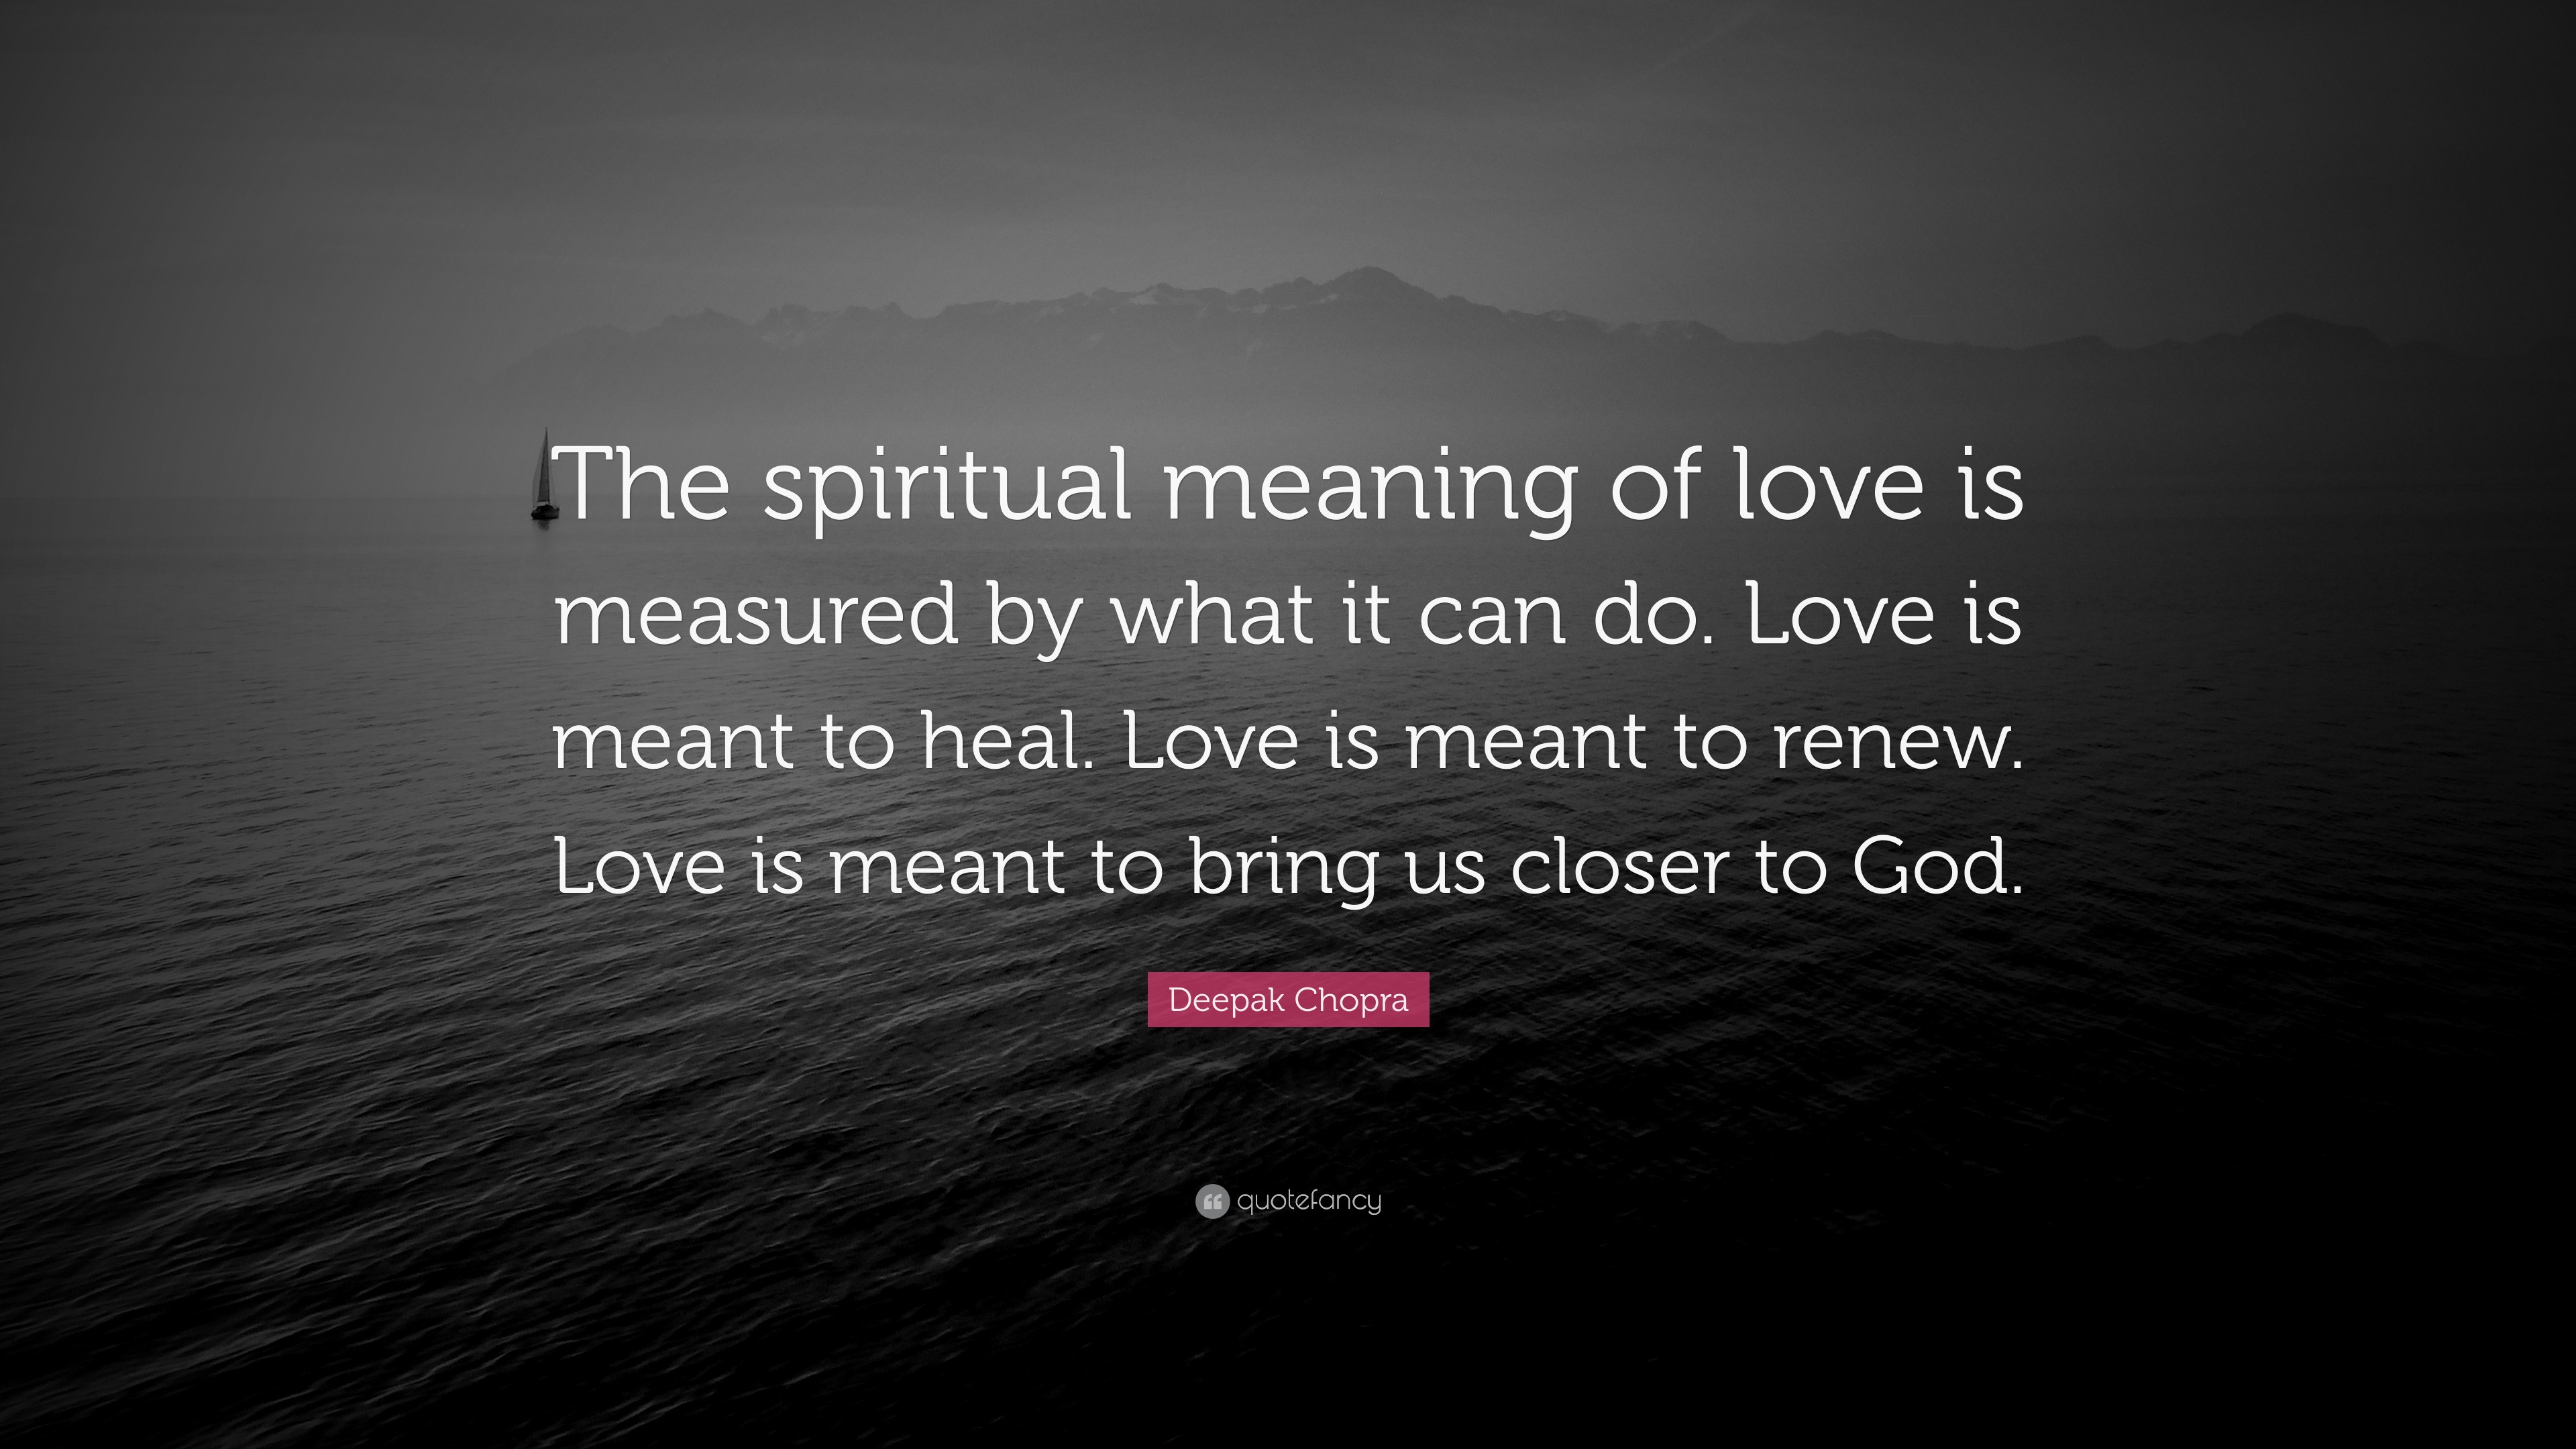 Love Means... Renewal by Andrew Grey